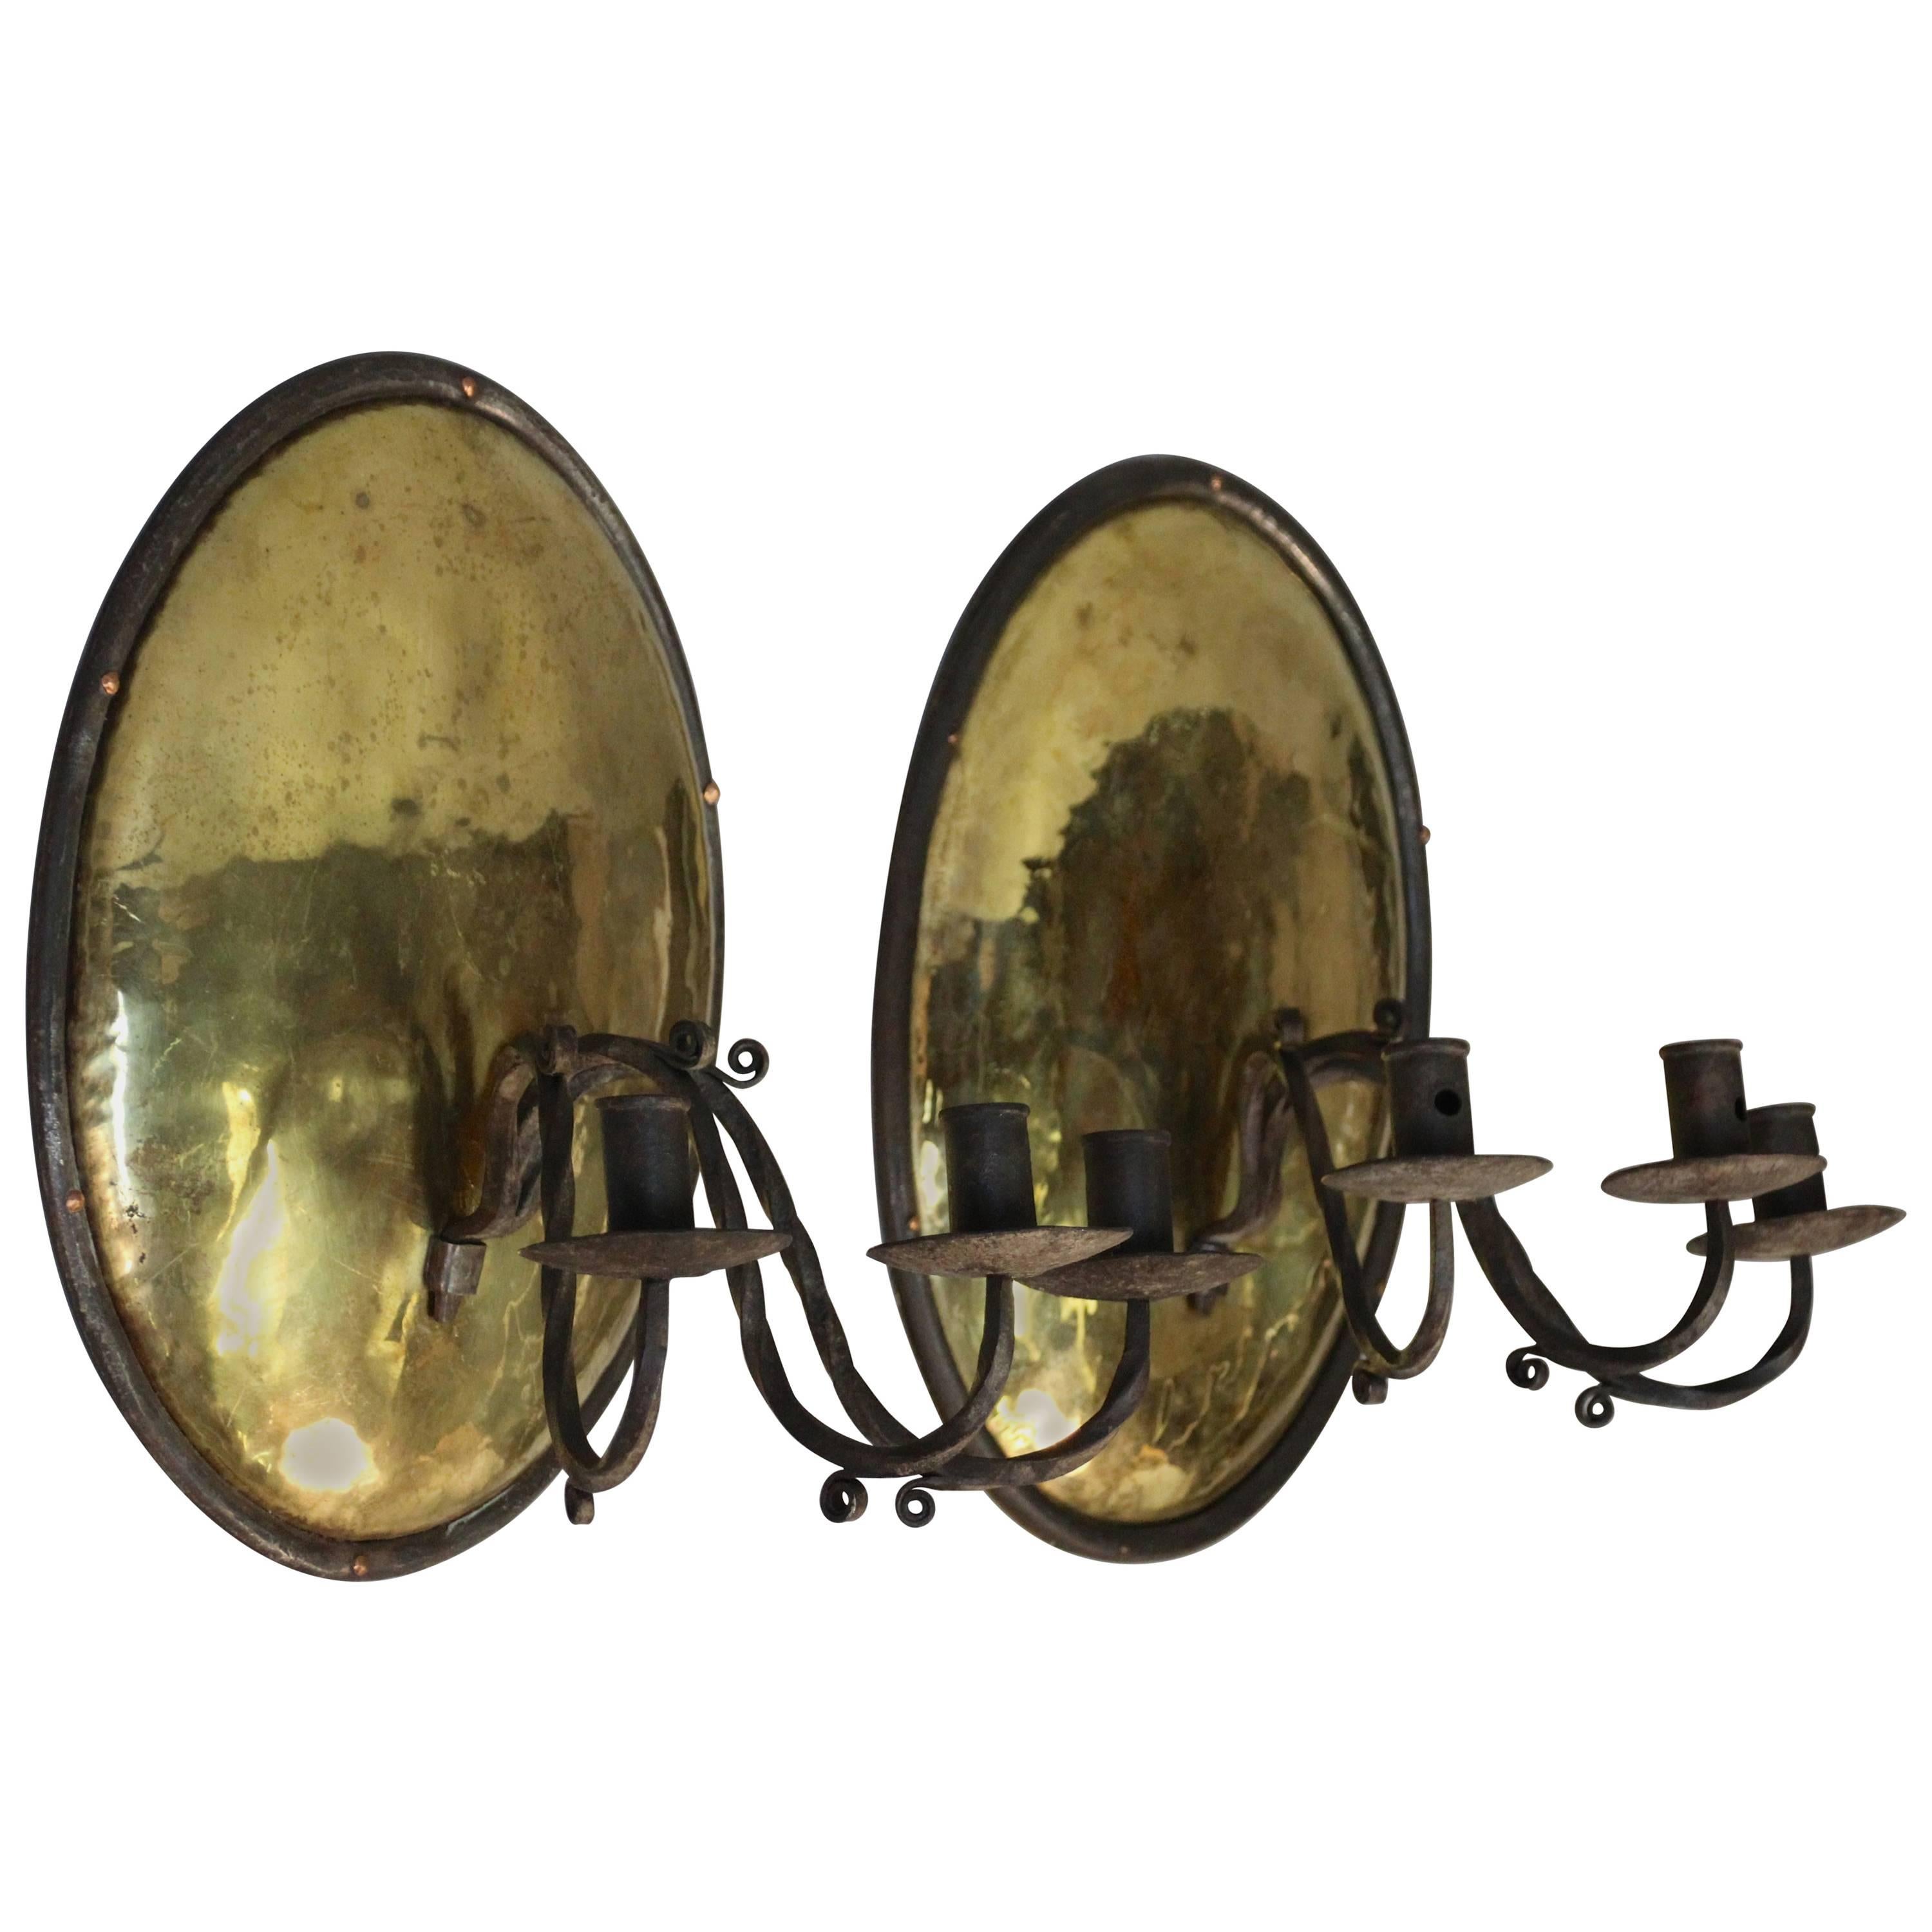 Pair of Brass and Wrought Iron Three-Light Candleholders